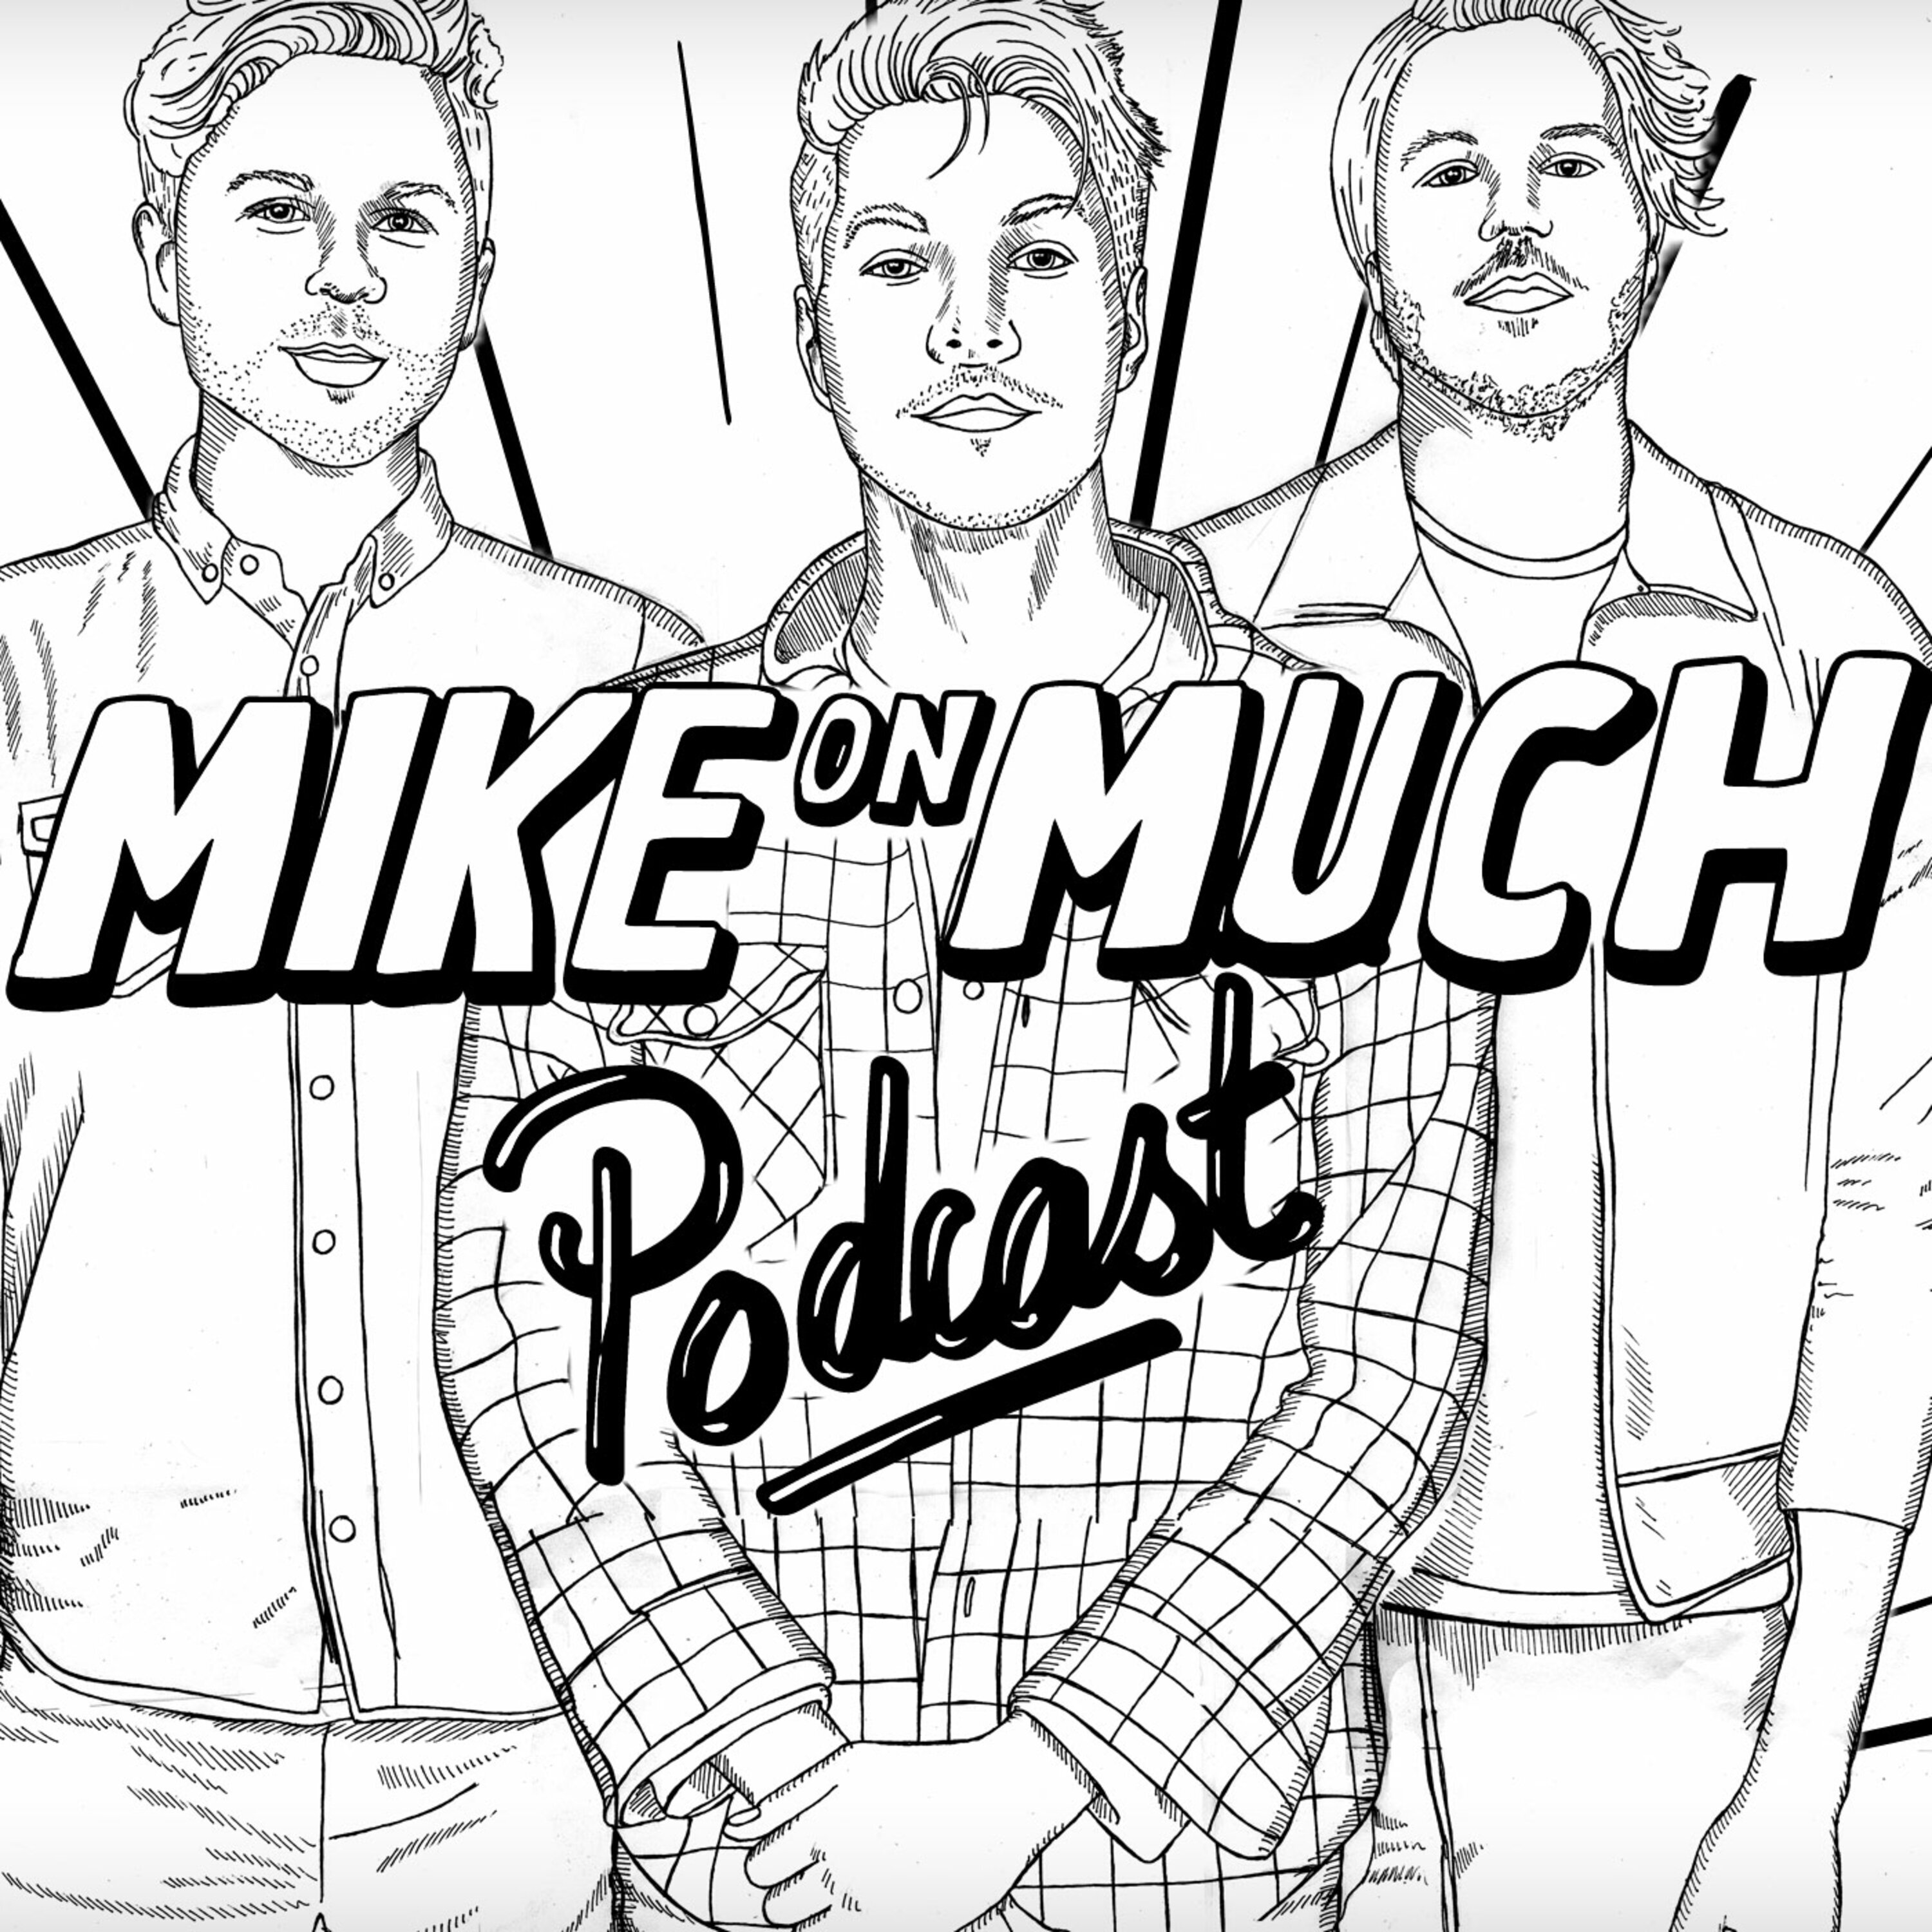 Season 1 Mike On Much: “Which Backstreet Boy Did You Feel Represented You More?”